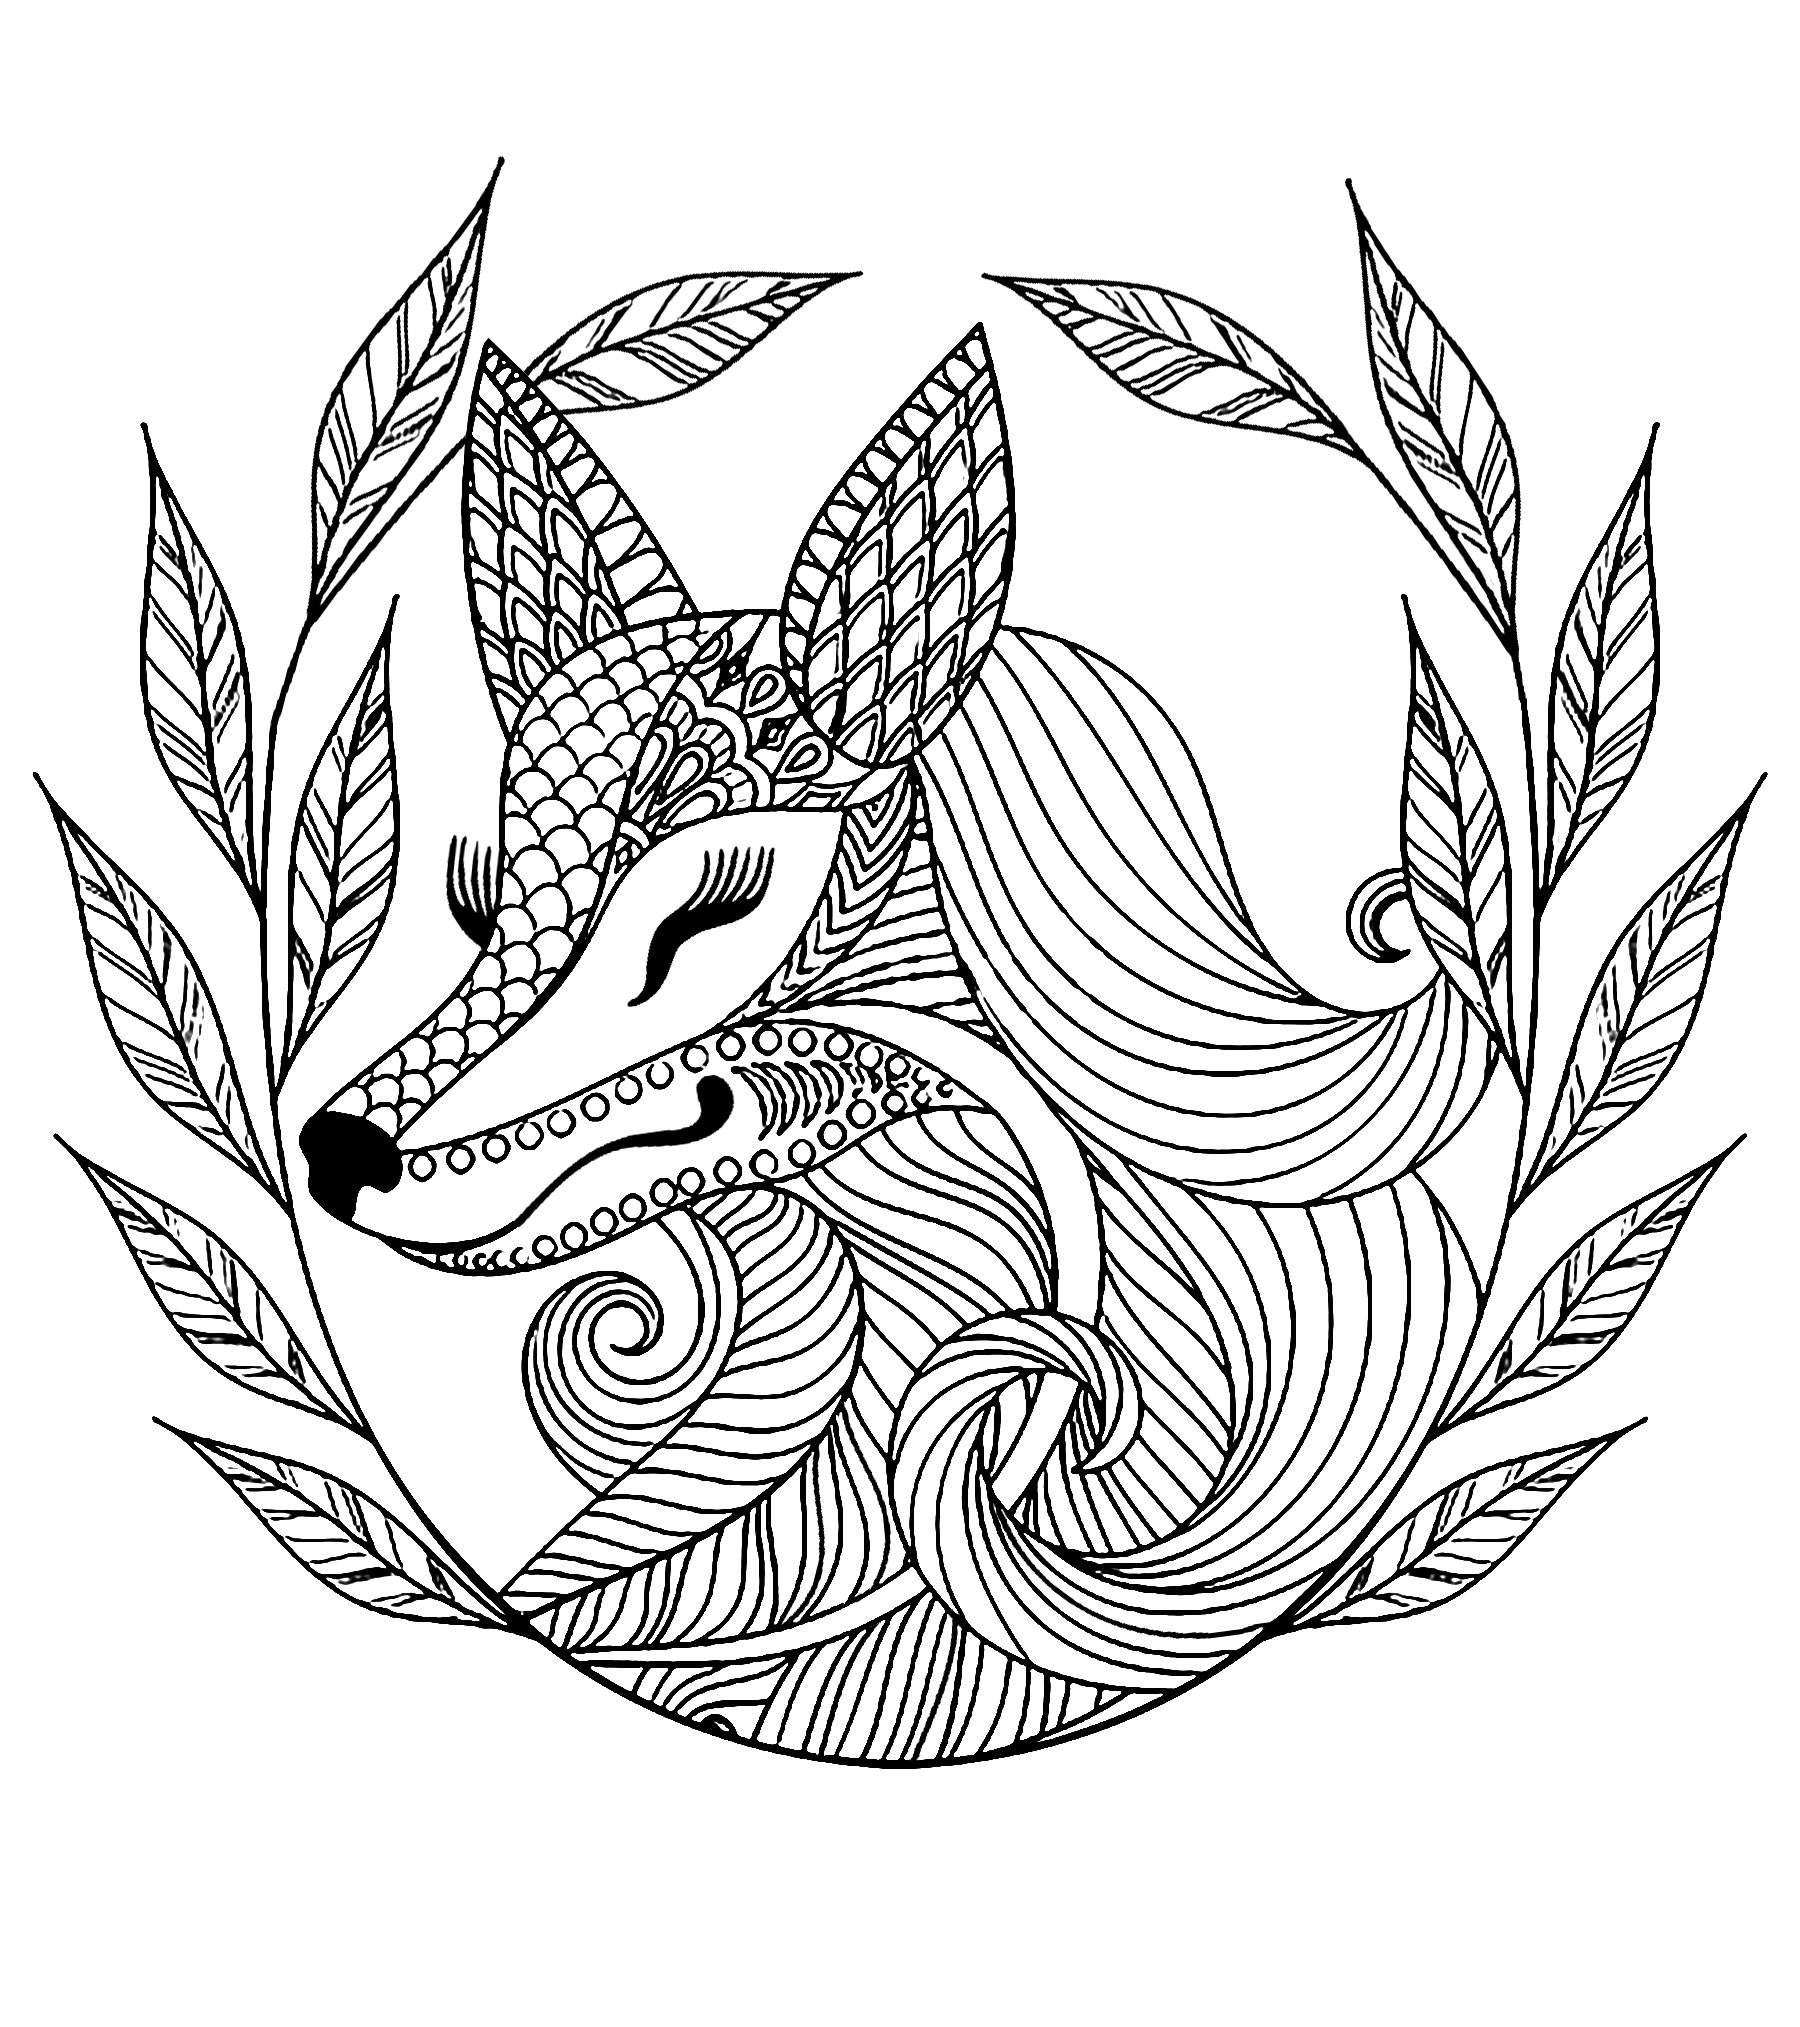 image=animals coloring page fox and leaves 1